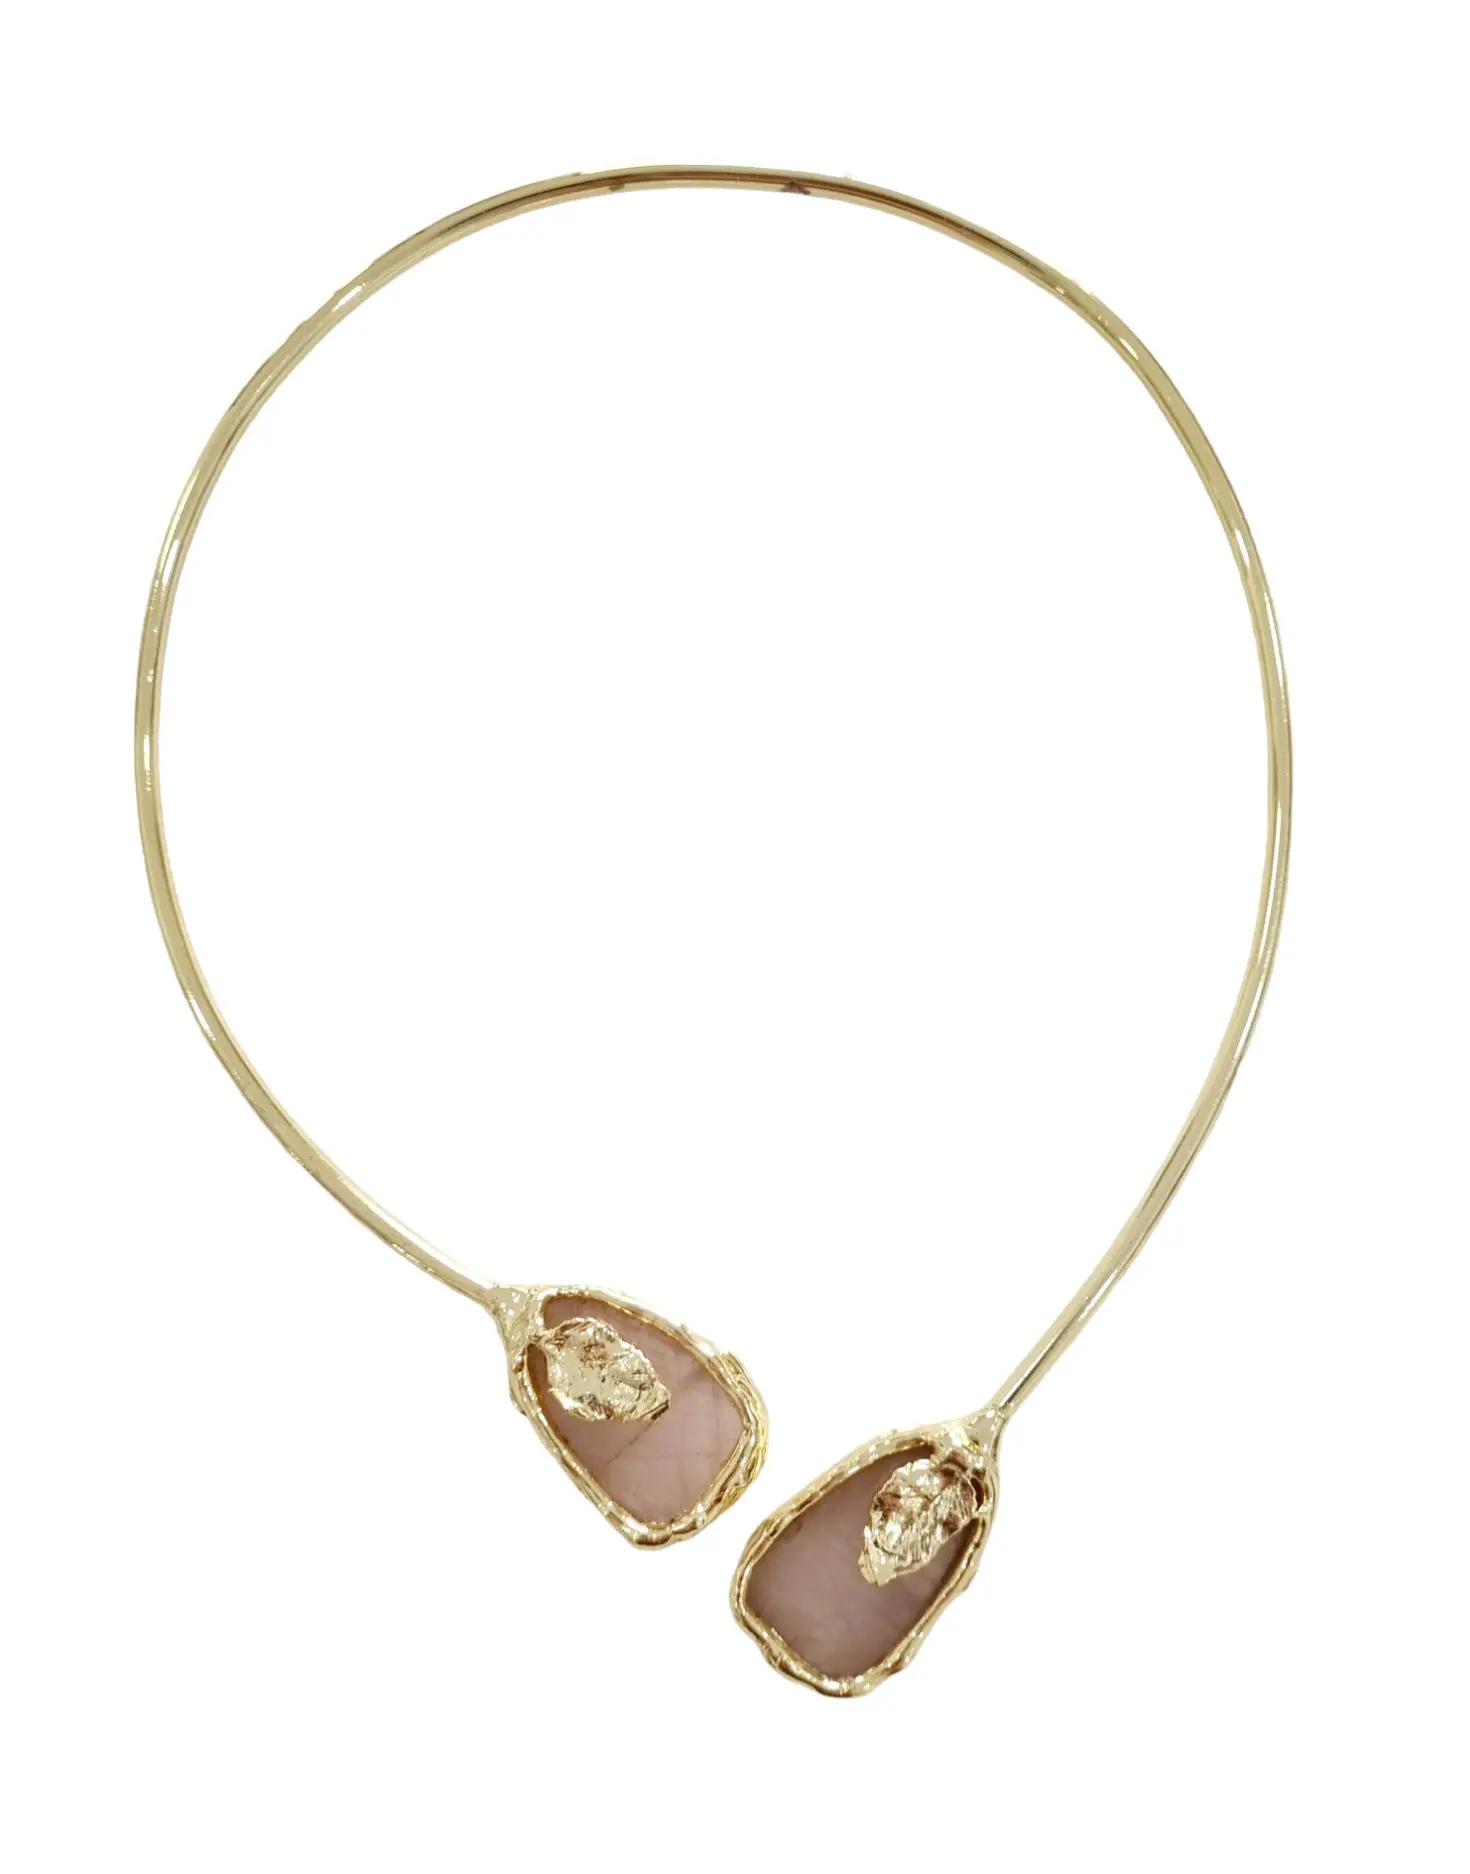 Choker necklace handcrafted with brass and rose quartz.